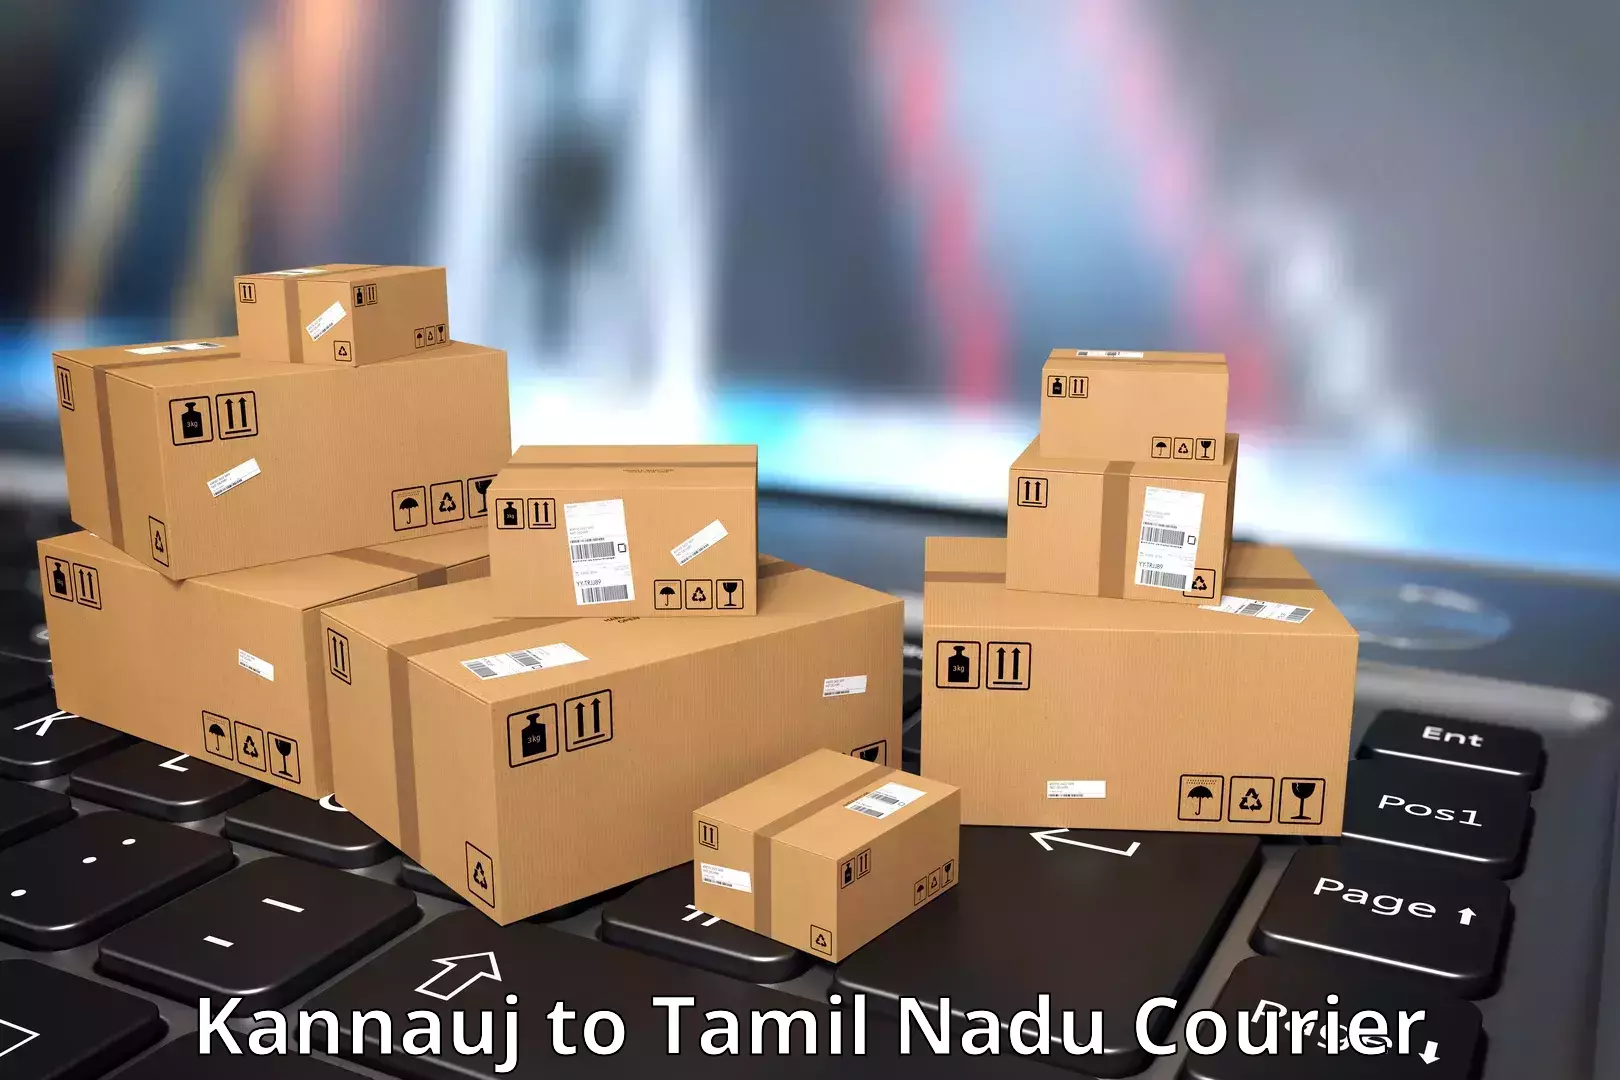 24/7 courier service Kannauj to Nagercoil